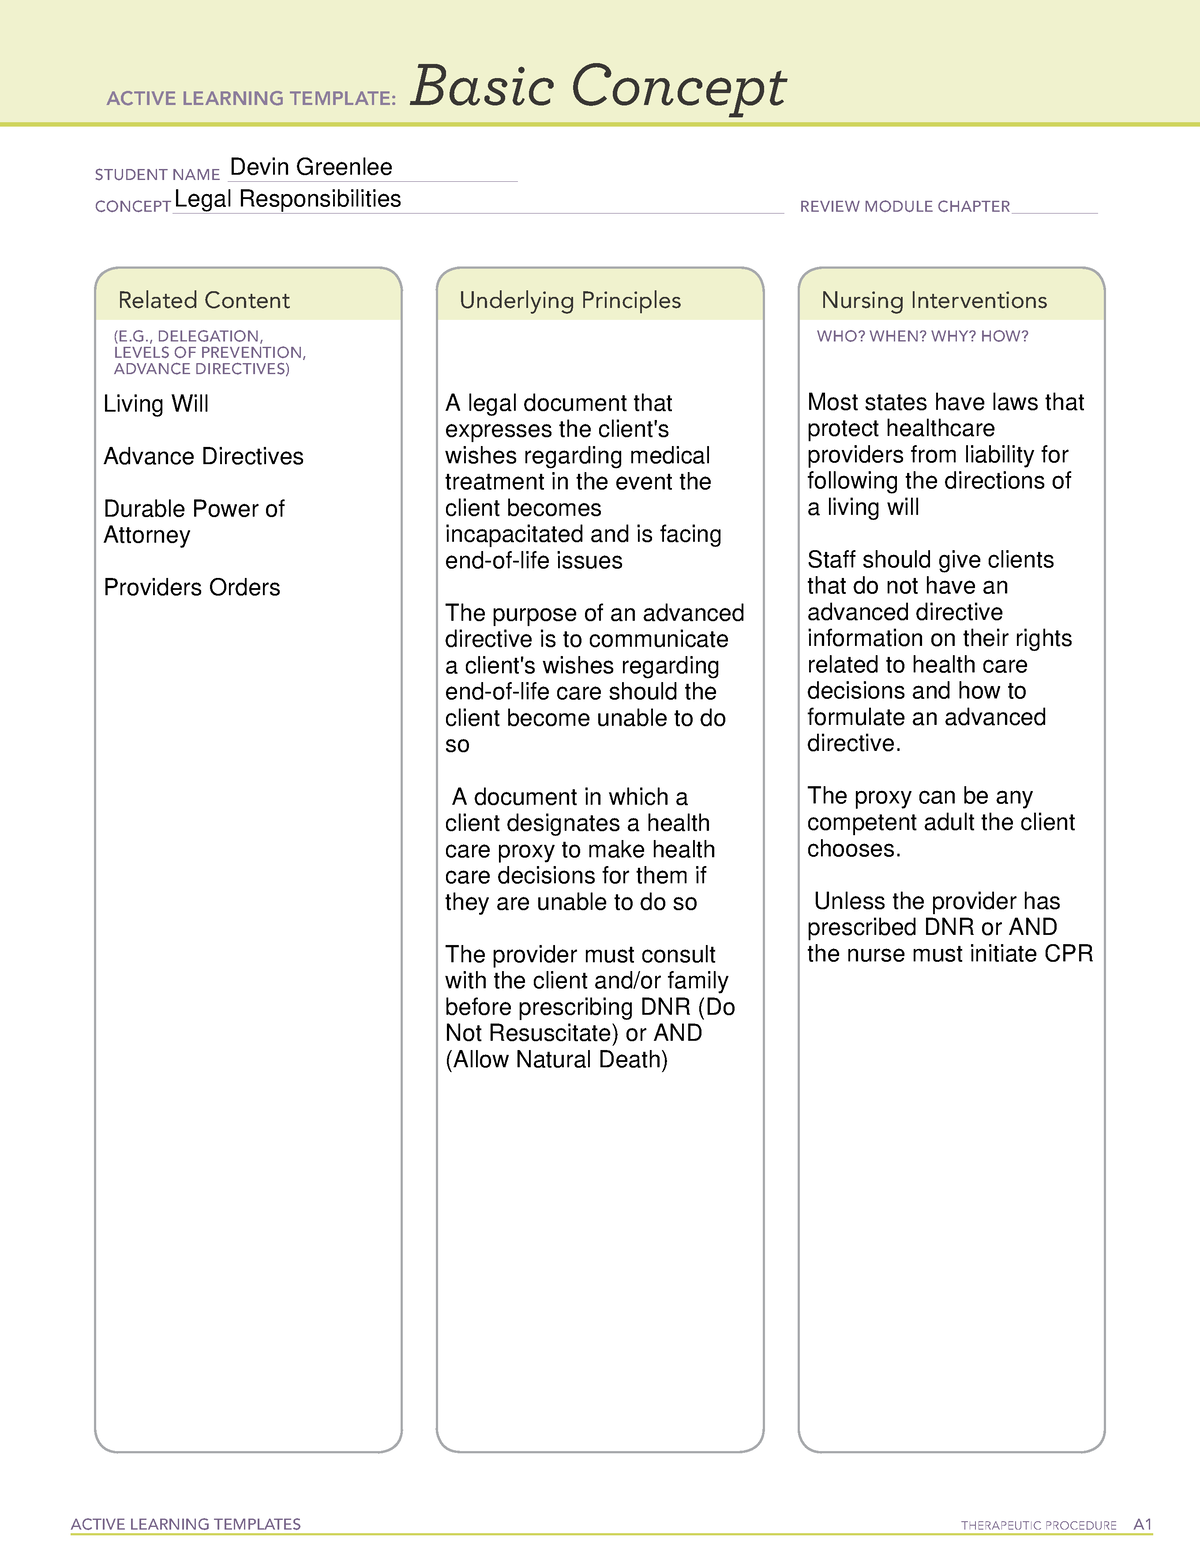 active-learning-template-basic-concept-active-learning-templates